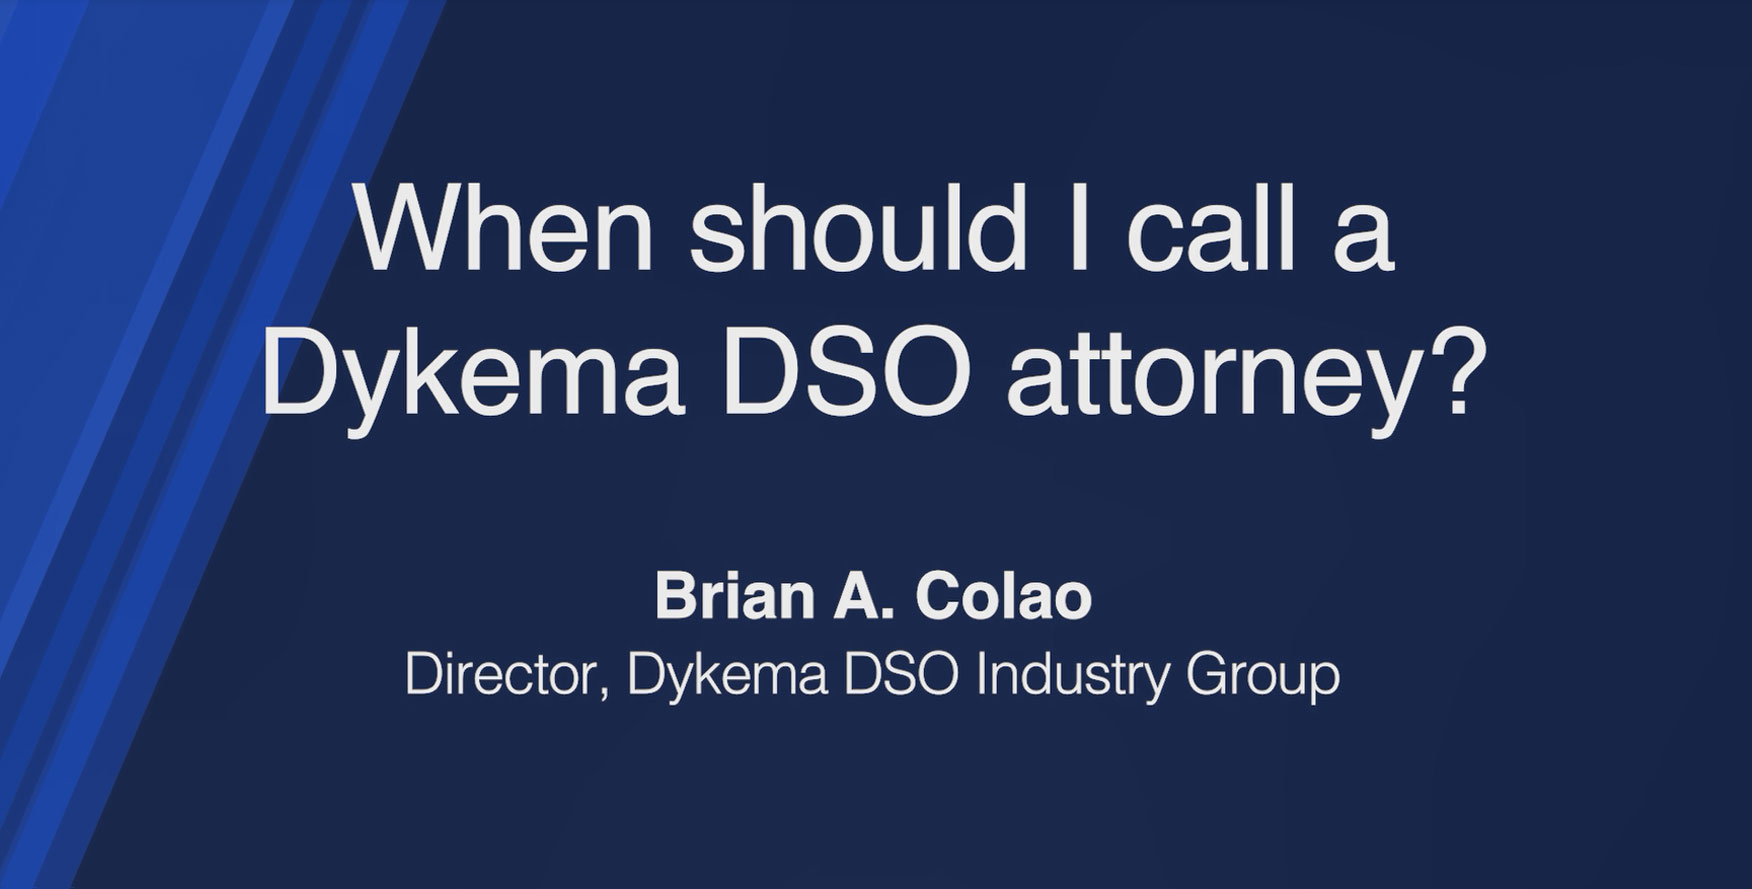 When should I call a Dykema DSO Attorney?